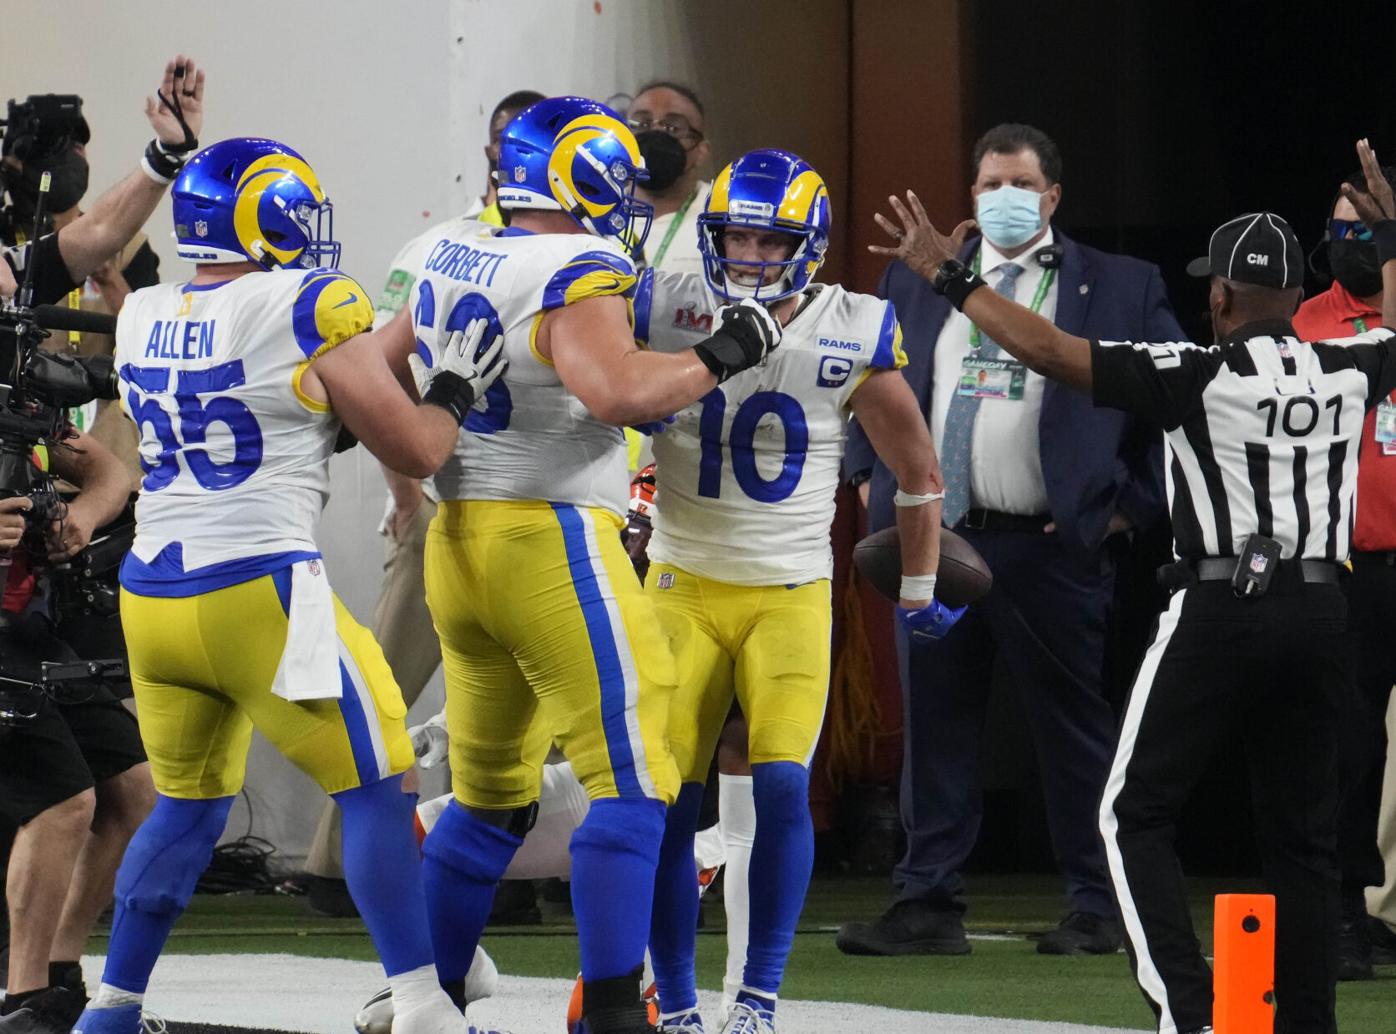 Rams win Super Bowl with late Kupp TD